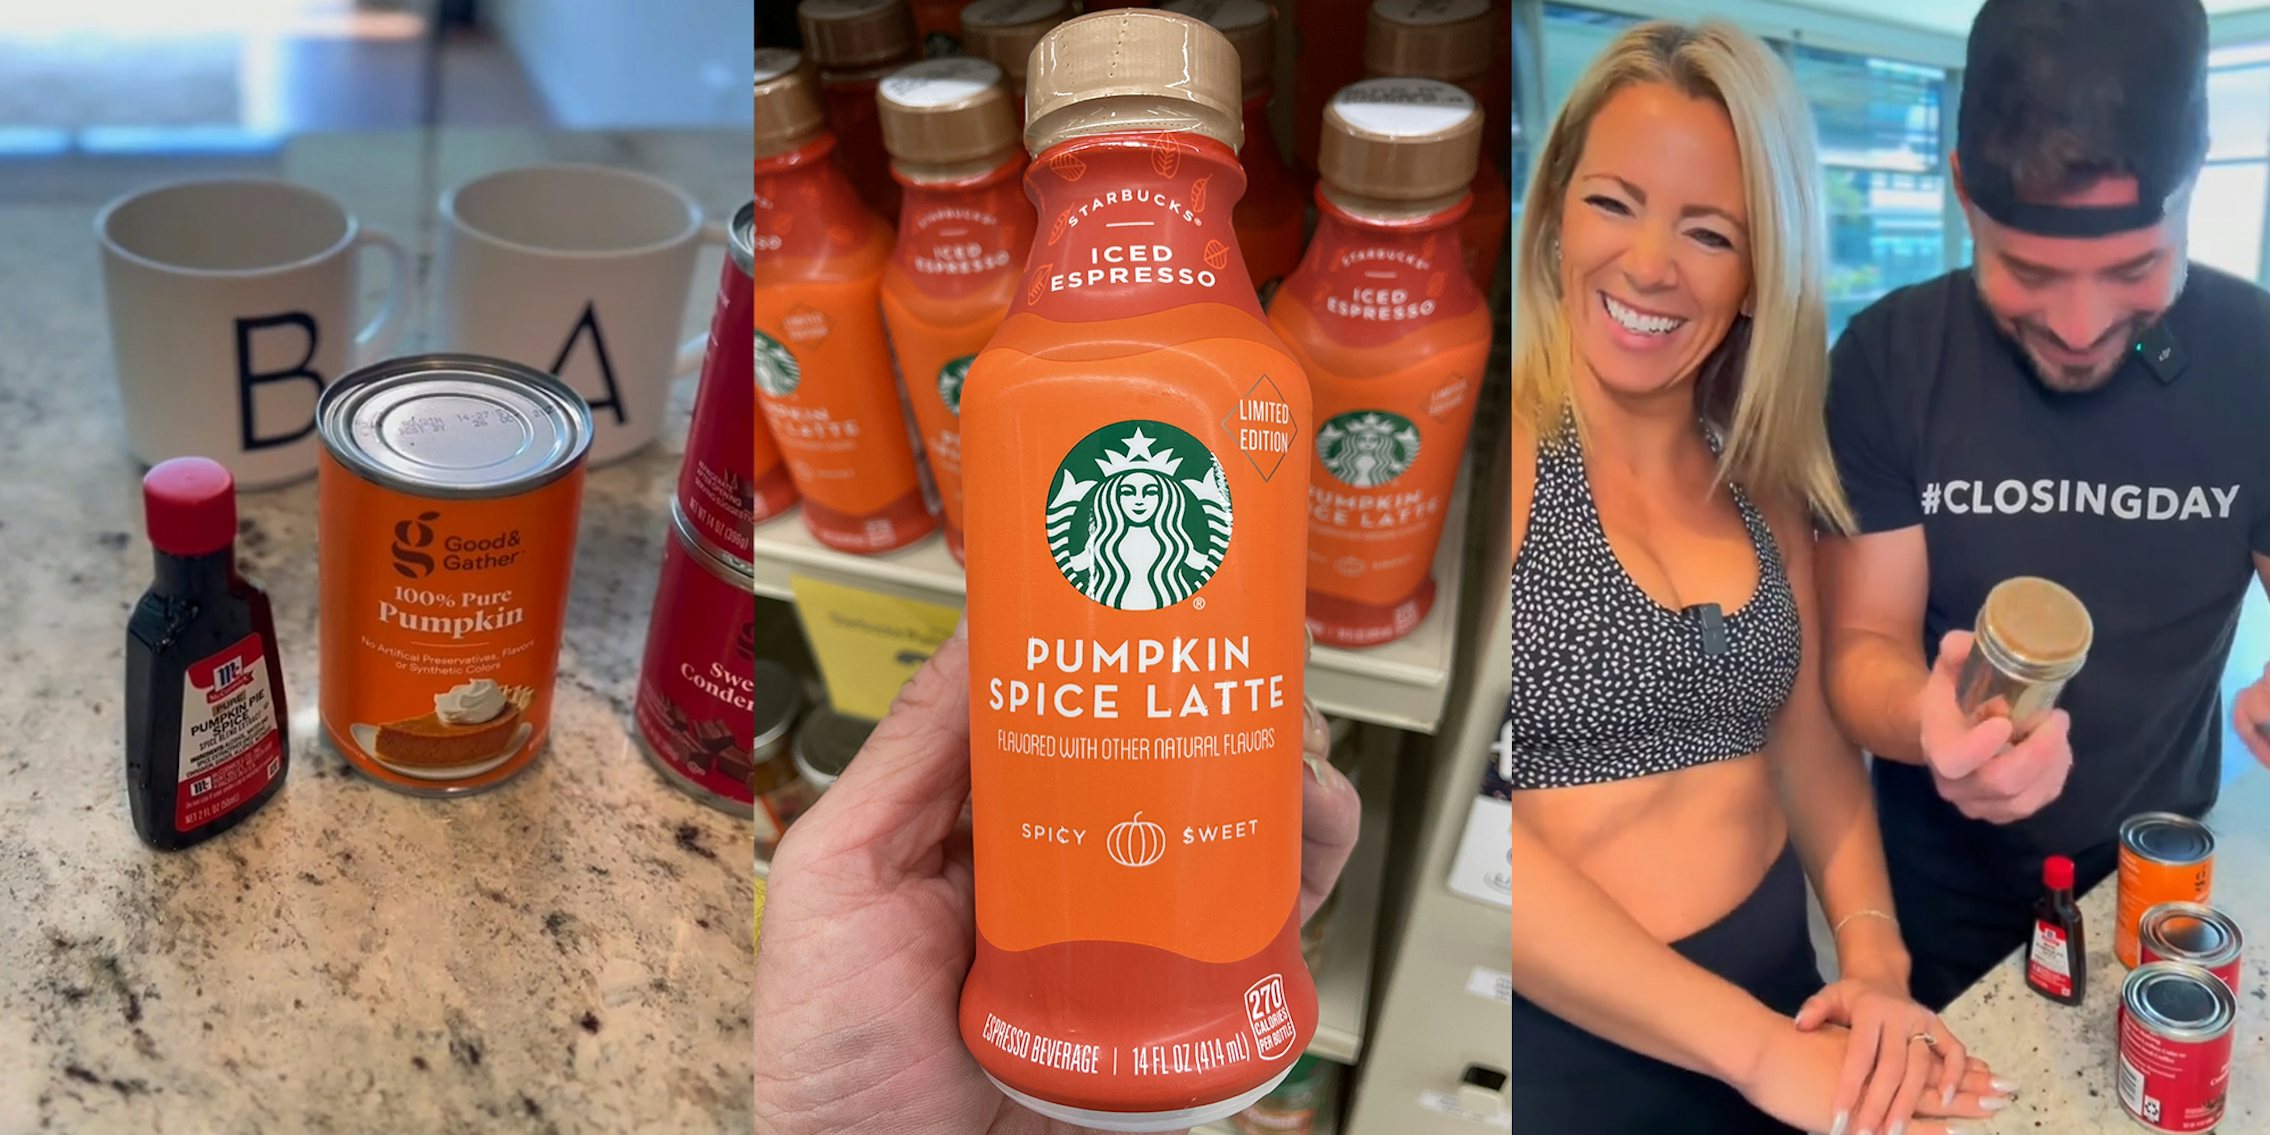 Customer shows how to make Starbucks pumpkin spice latte at home with Target Good & Gather products for 86 cents